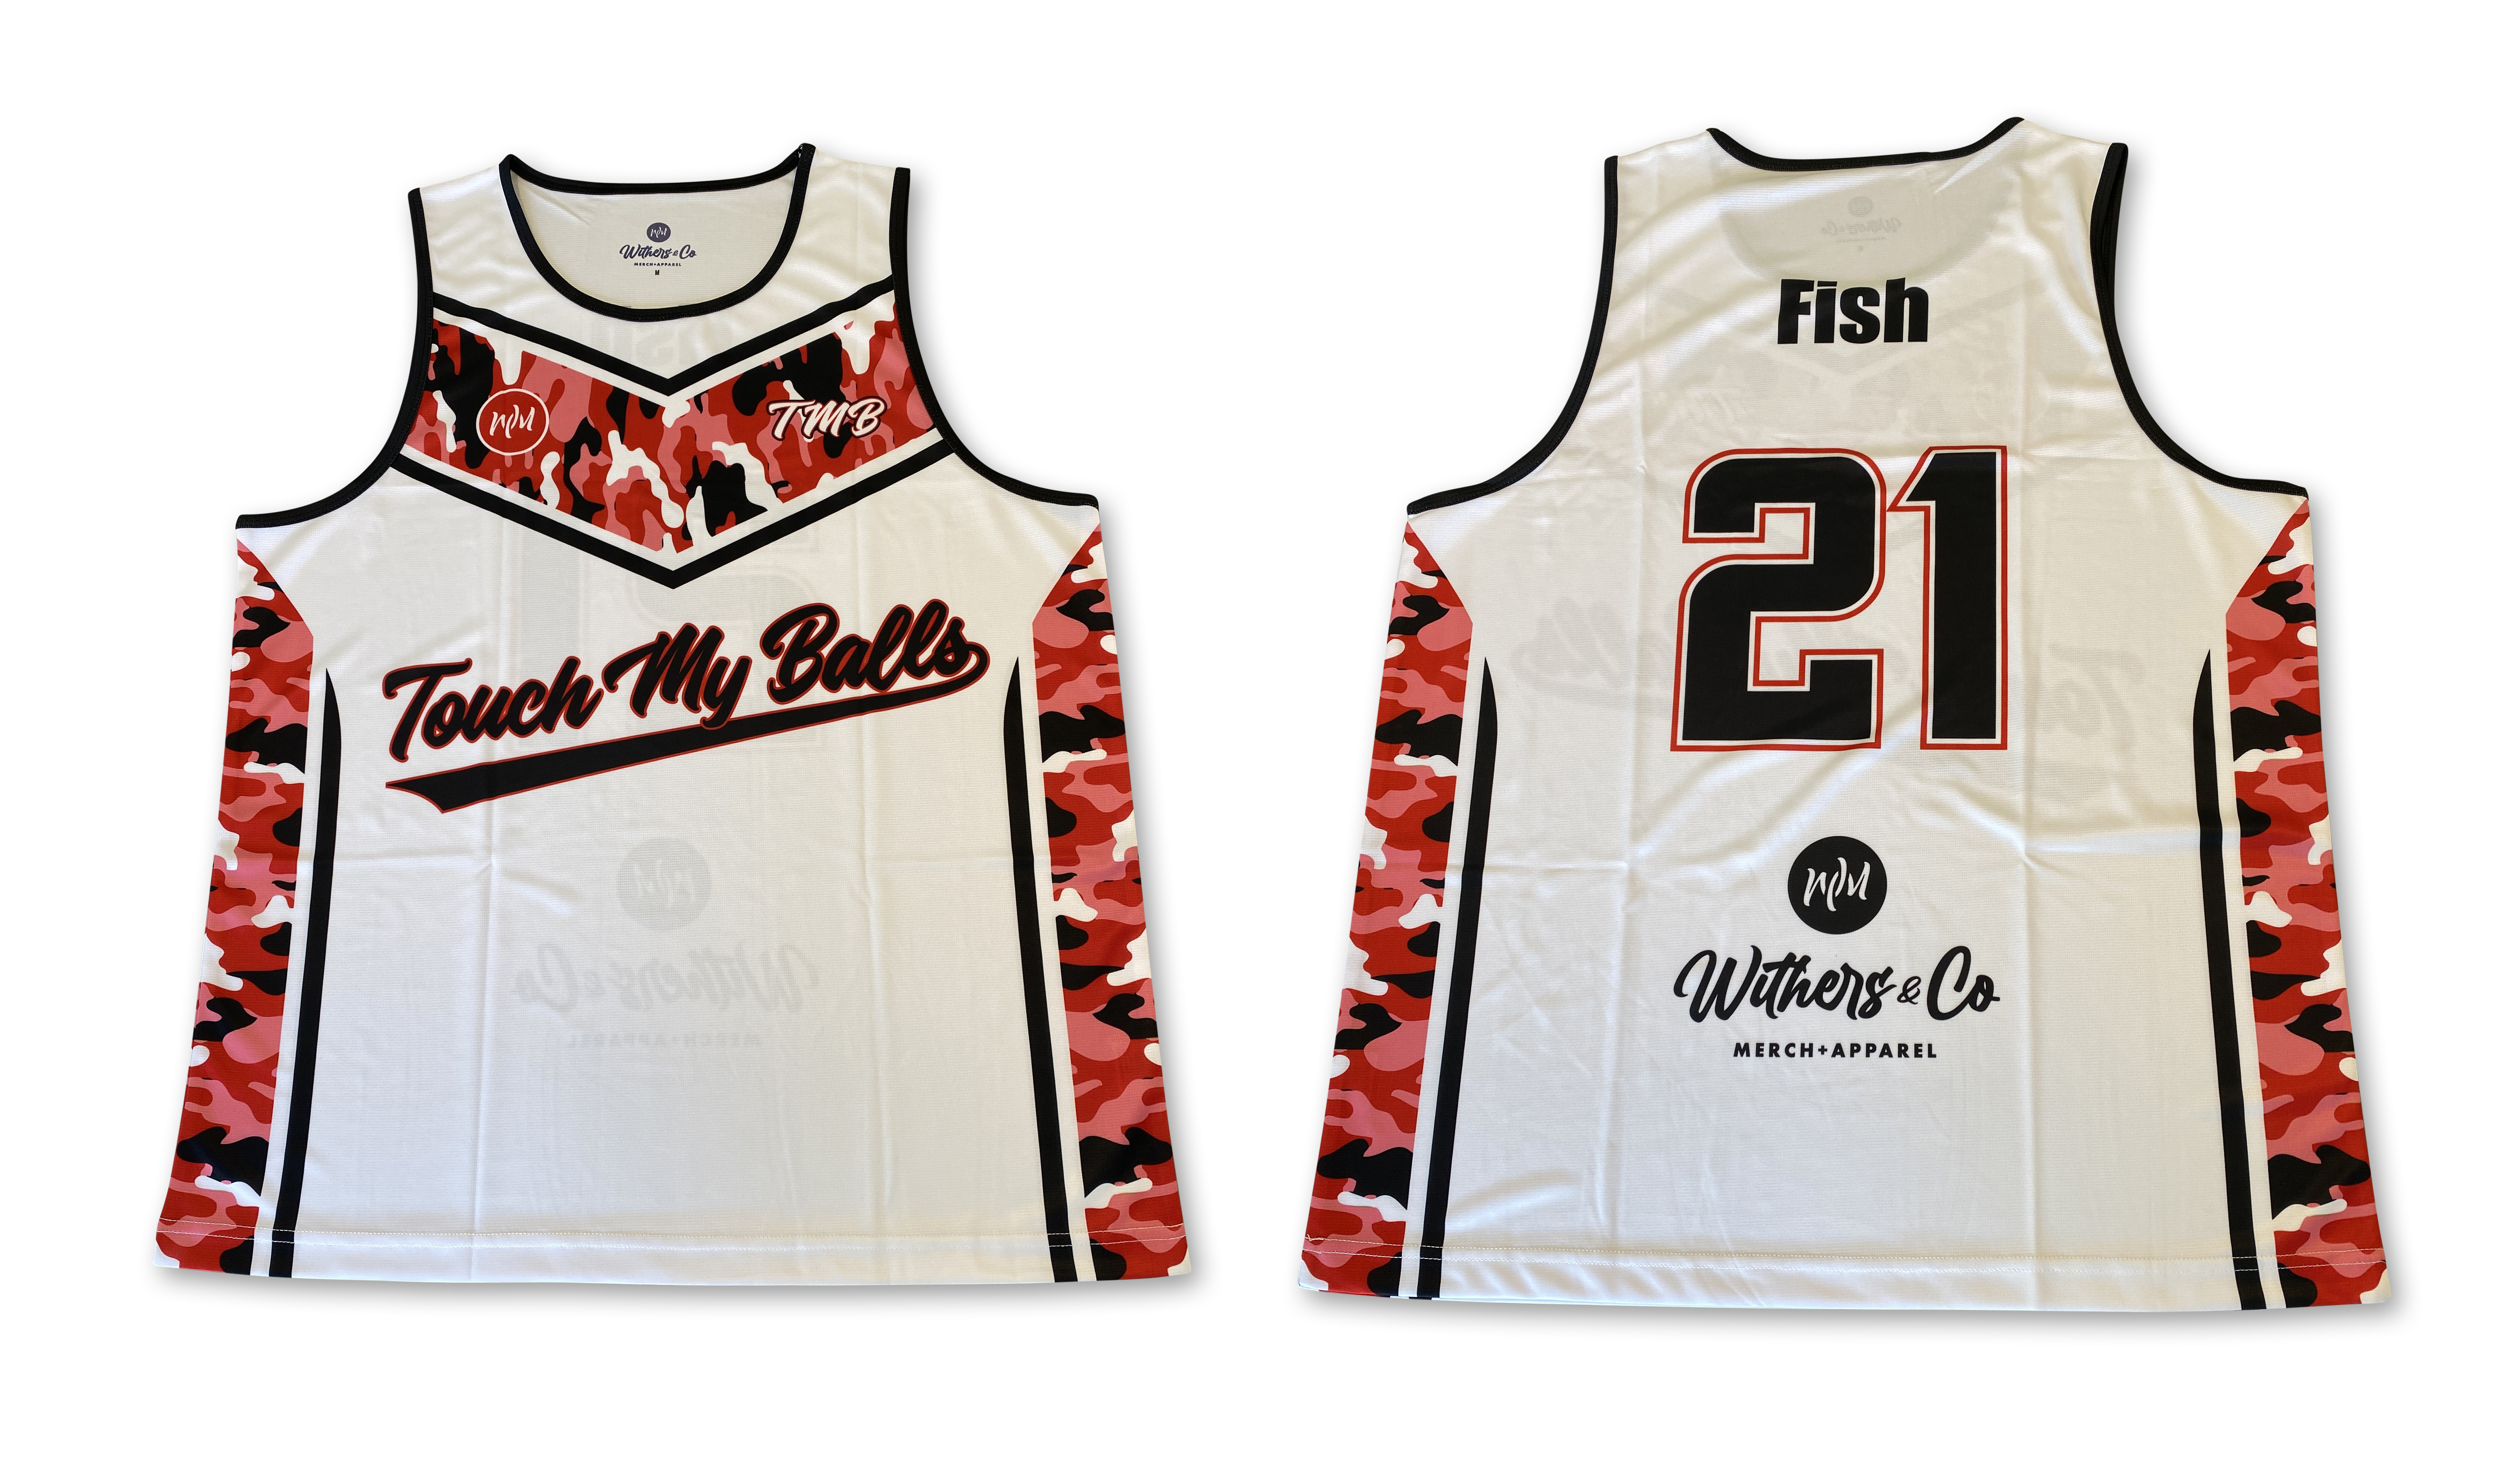 Sublimated apparel sublimated uniforms withers and co4